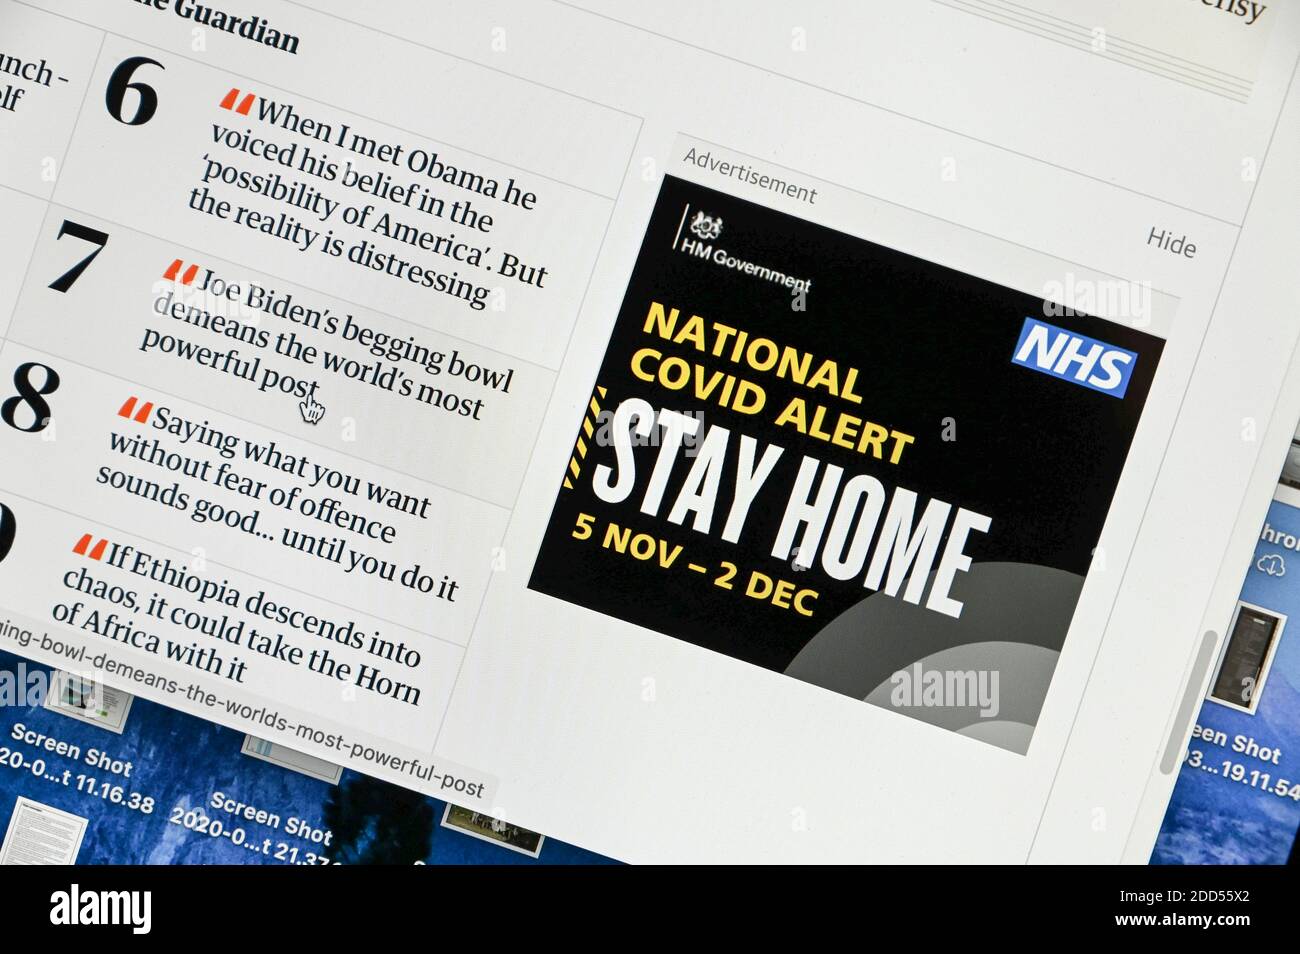 On-line National Covid Advice from the UK Government to 'Stay Home' during the national 'second lockdown' from 5th November-2nd December 2020. Stock Photo